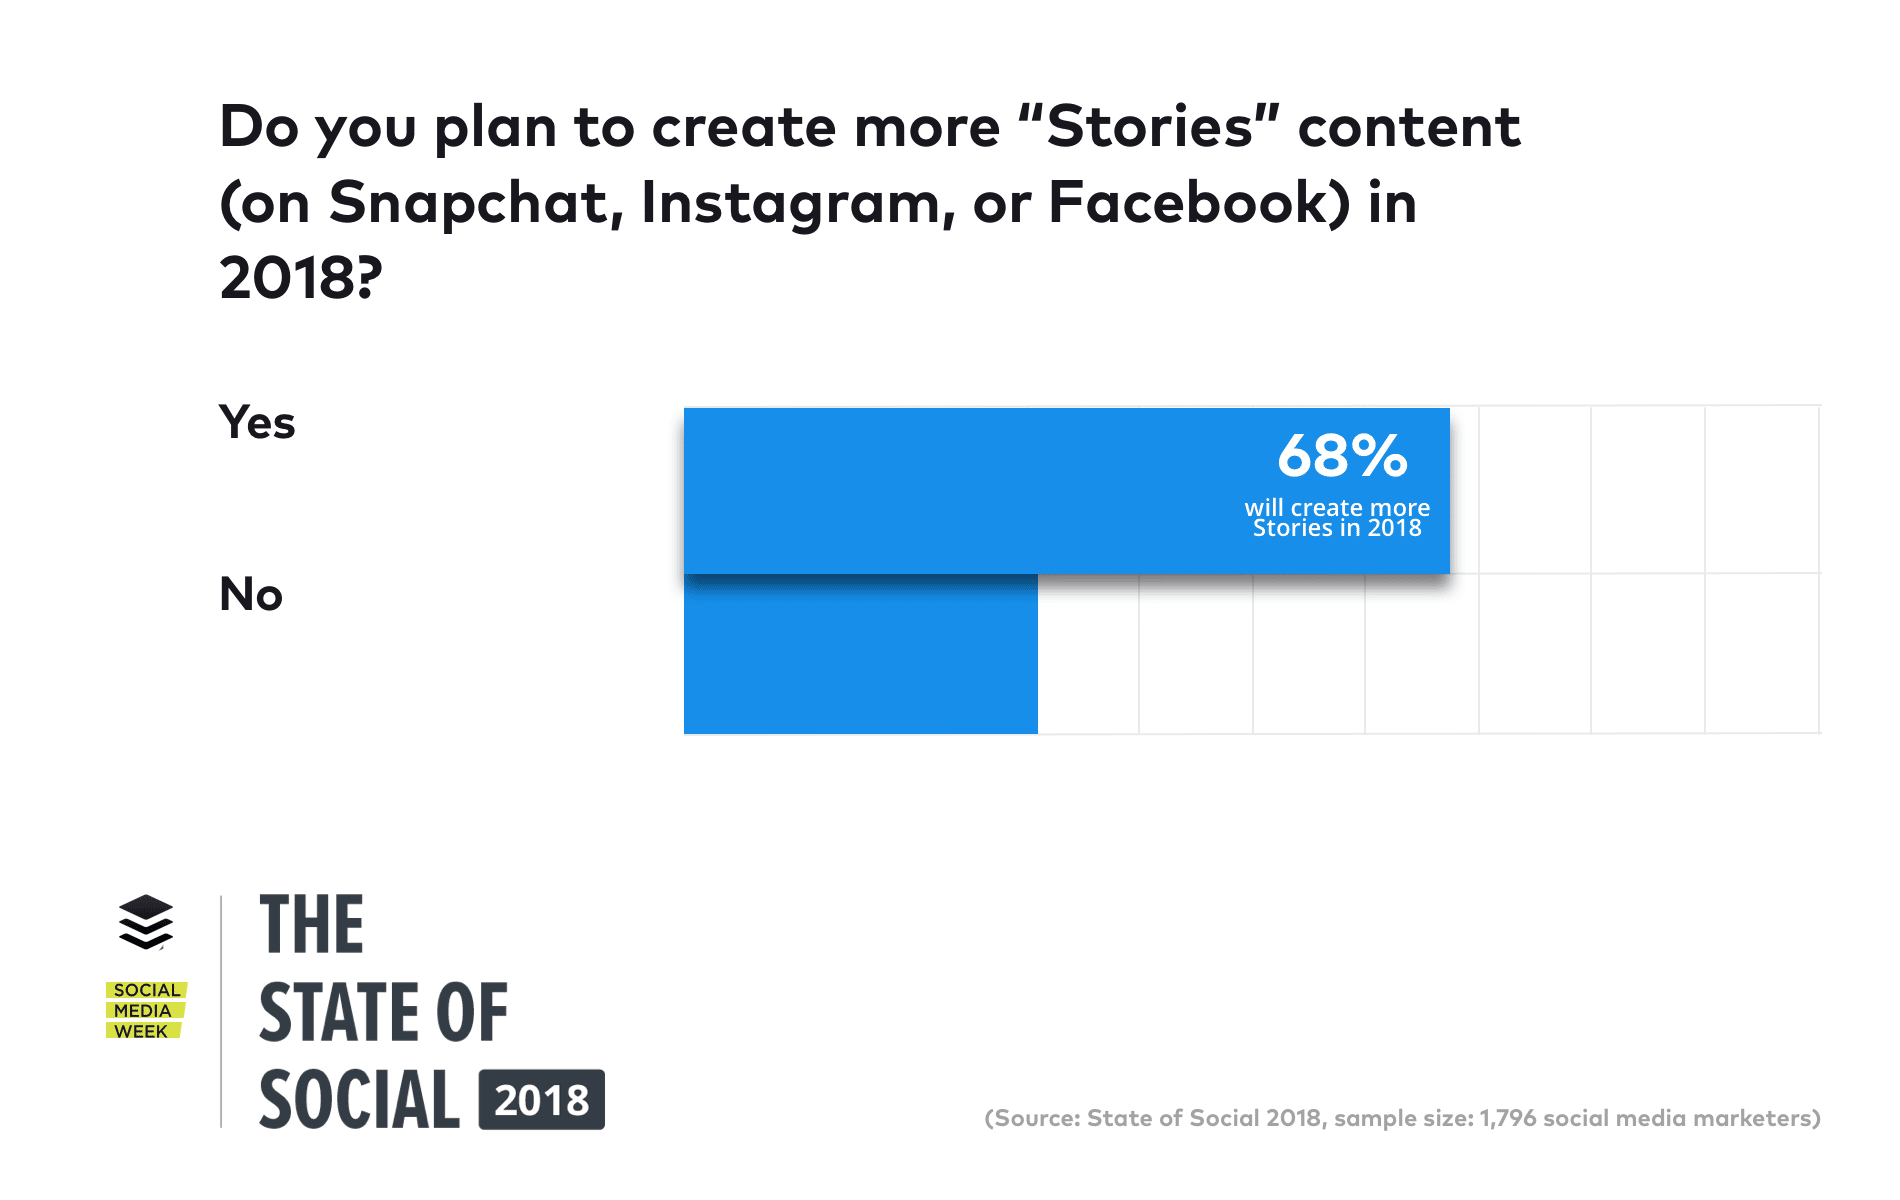 marketers plan to create more stories content